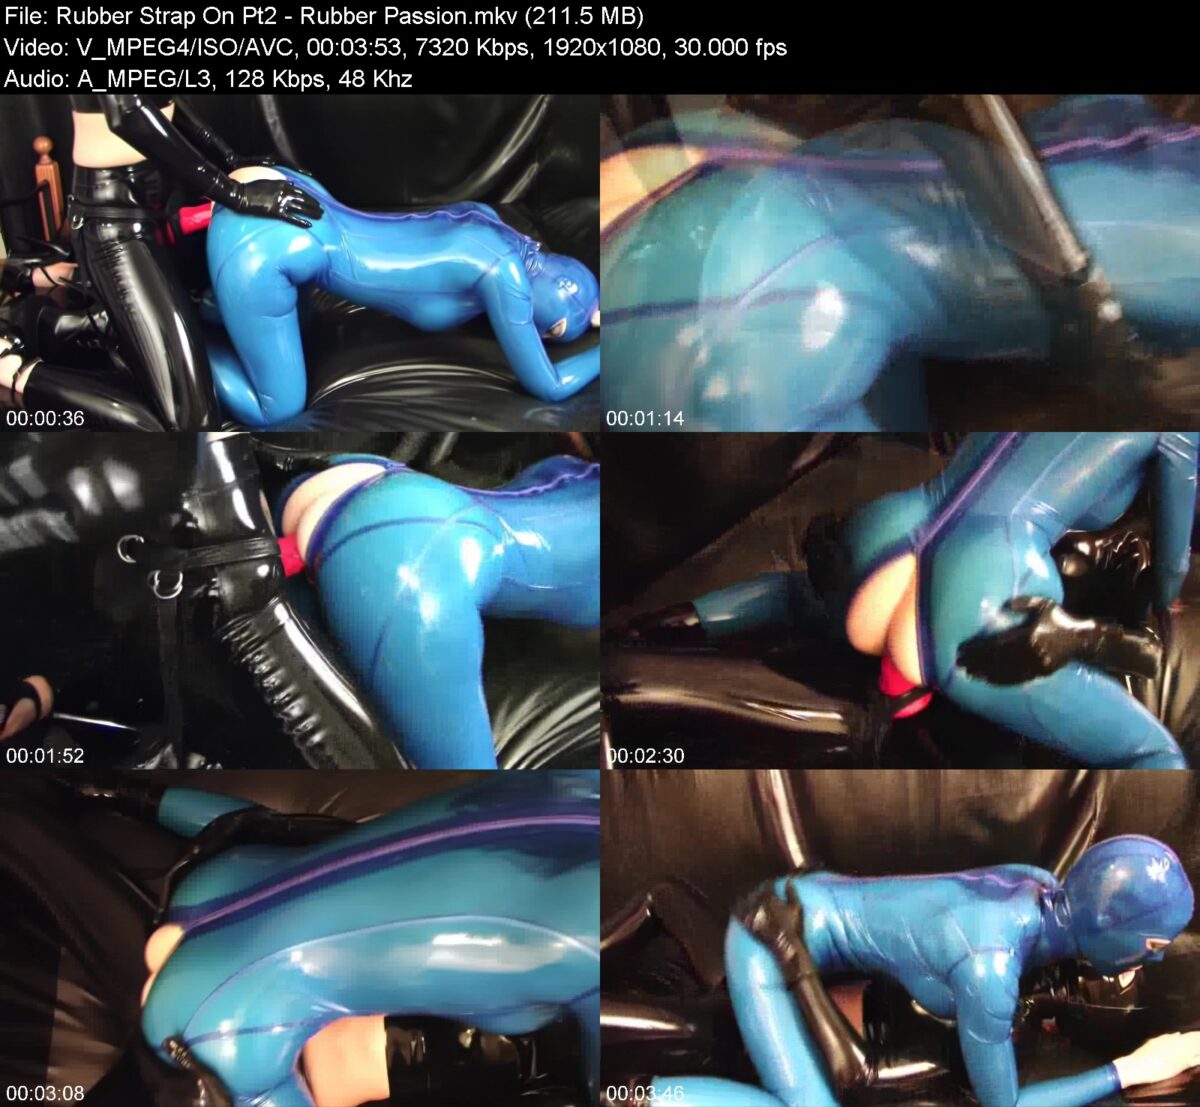 Actress: Rubber Strap On Pt2. Title and Studio: Rubber Passion